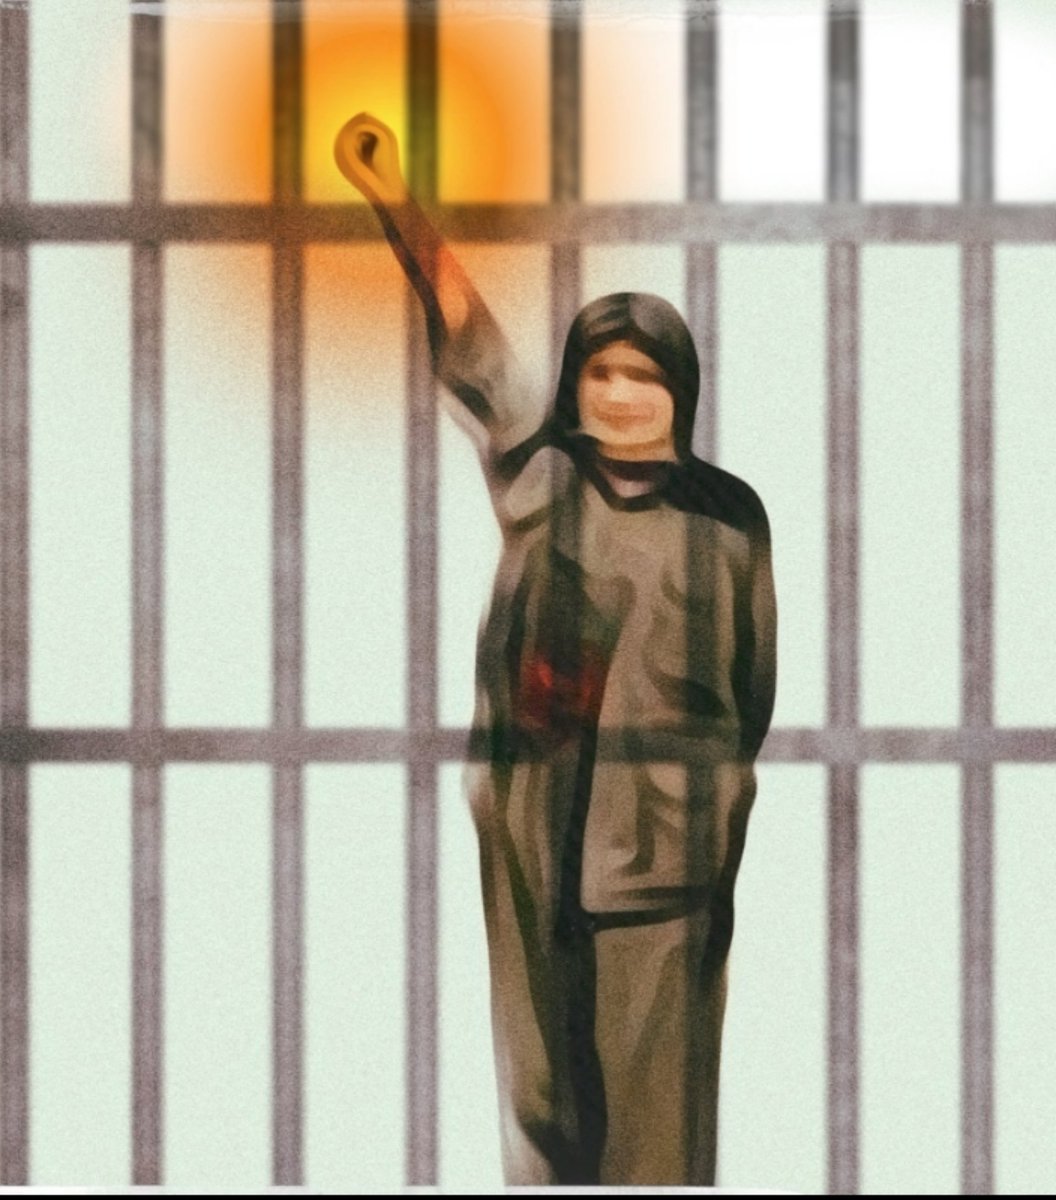 Zainab Jalalian, in Yazd Central Prison, lacks medical care despite having multiple health issues. Her vision is at risk, and she faces pressure to despair.
#ژن_ژیان_ئازادی
#FreeZeynabJalalian